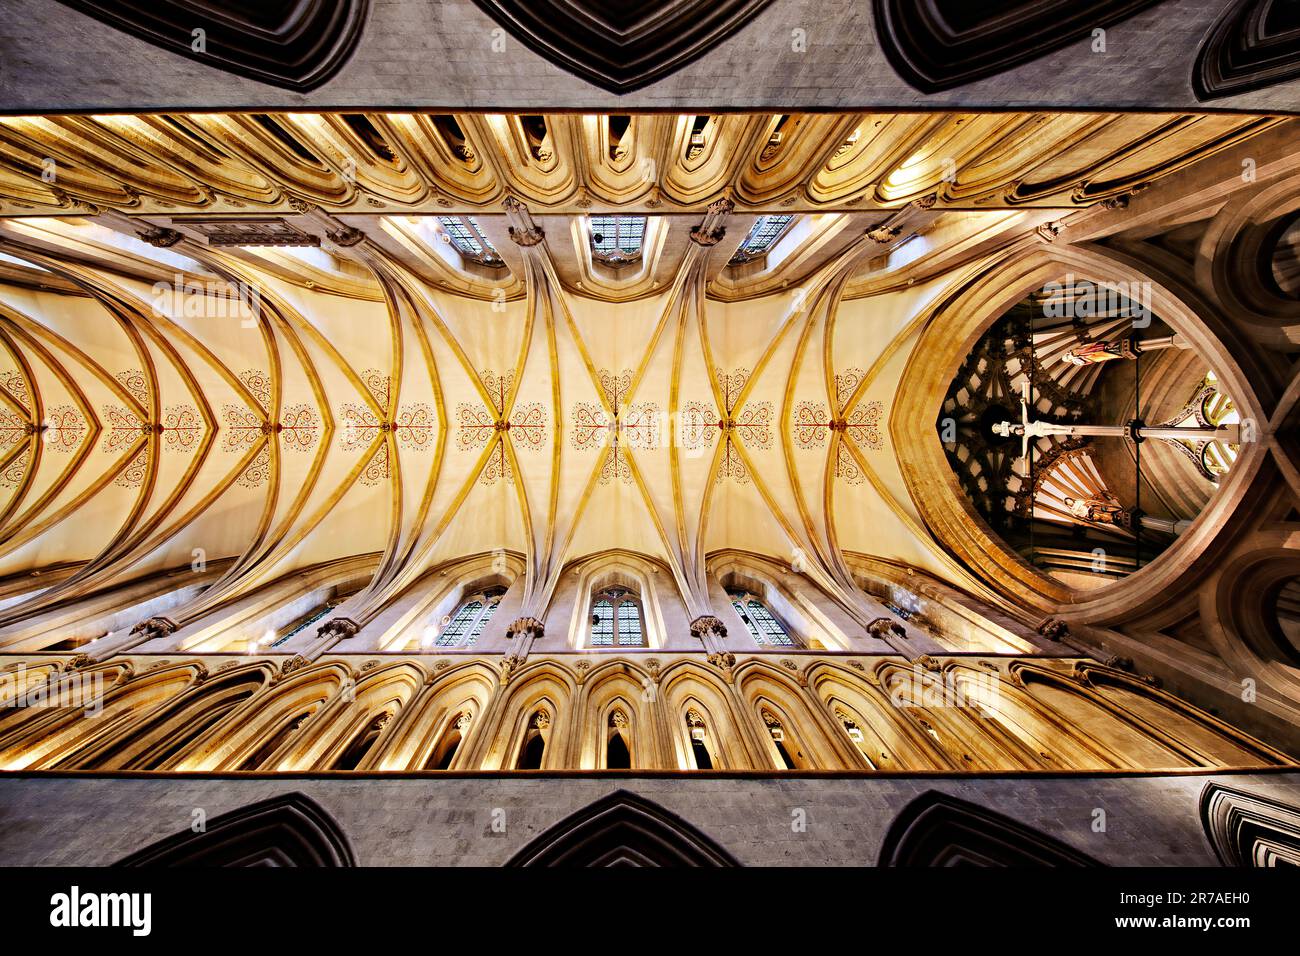 View of the ceiling inside Wells cathedral in Somerset, England, UK Stock Photo